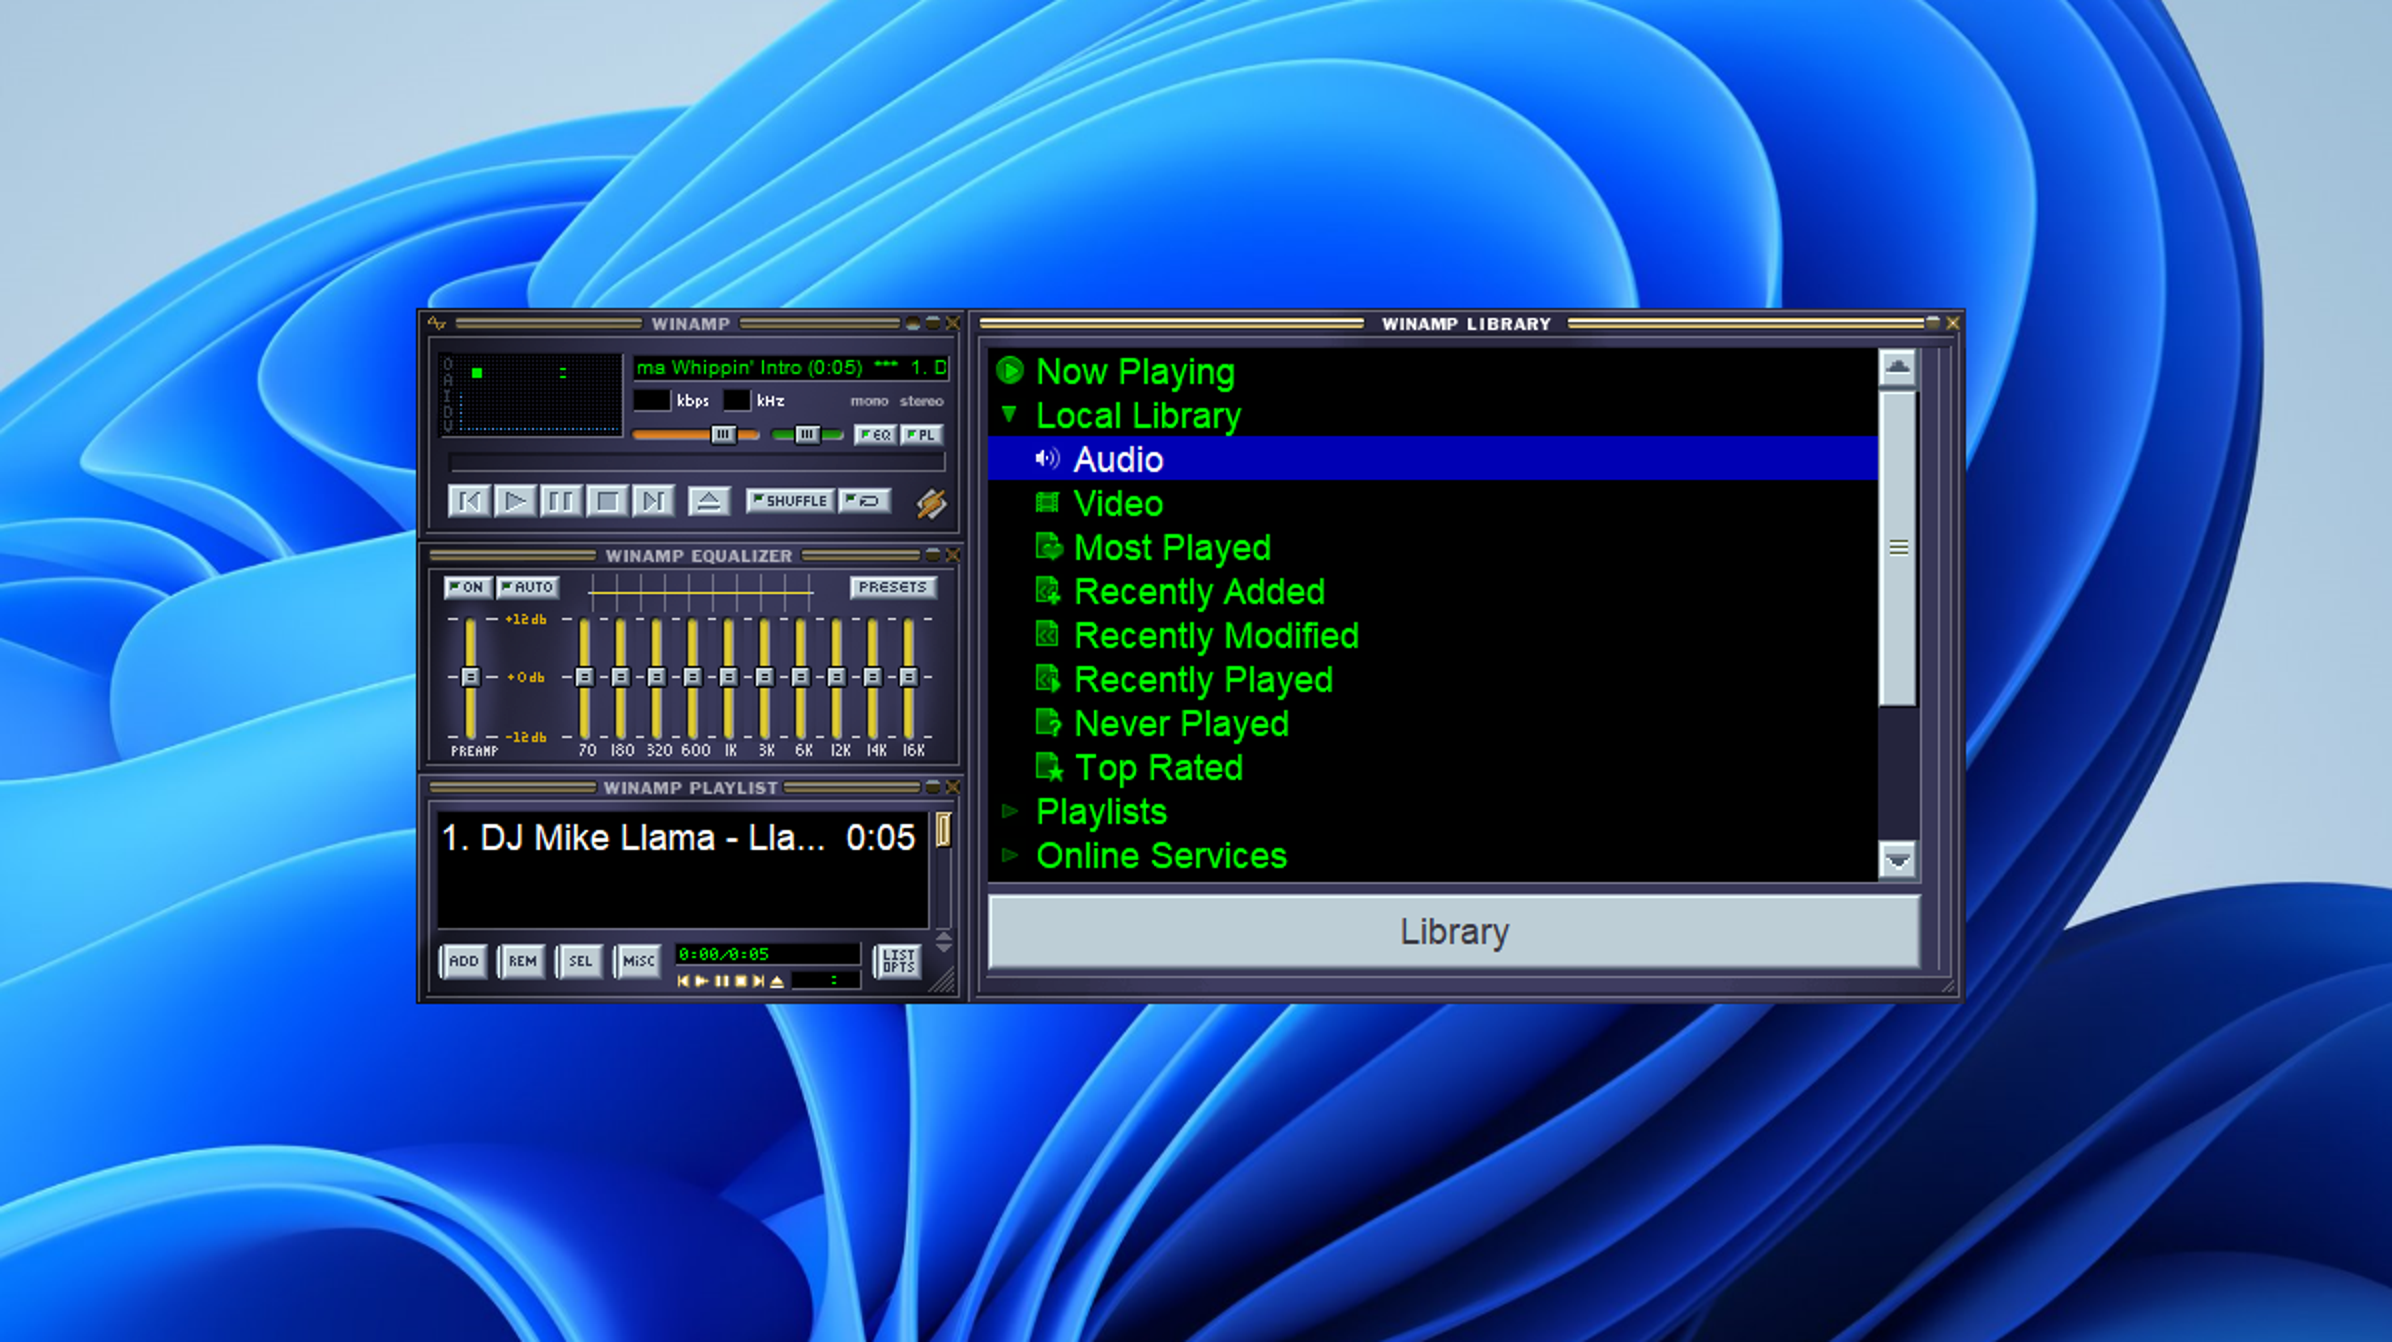 Winamp is back as a streaming service with fair rewards for musicians